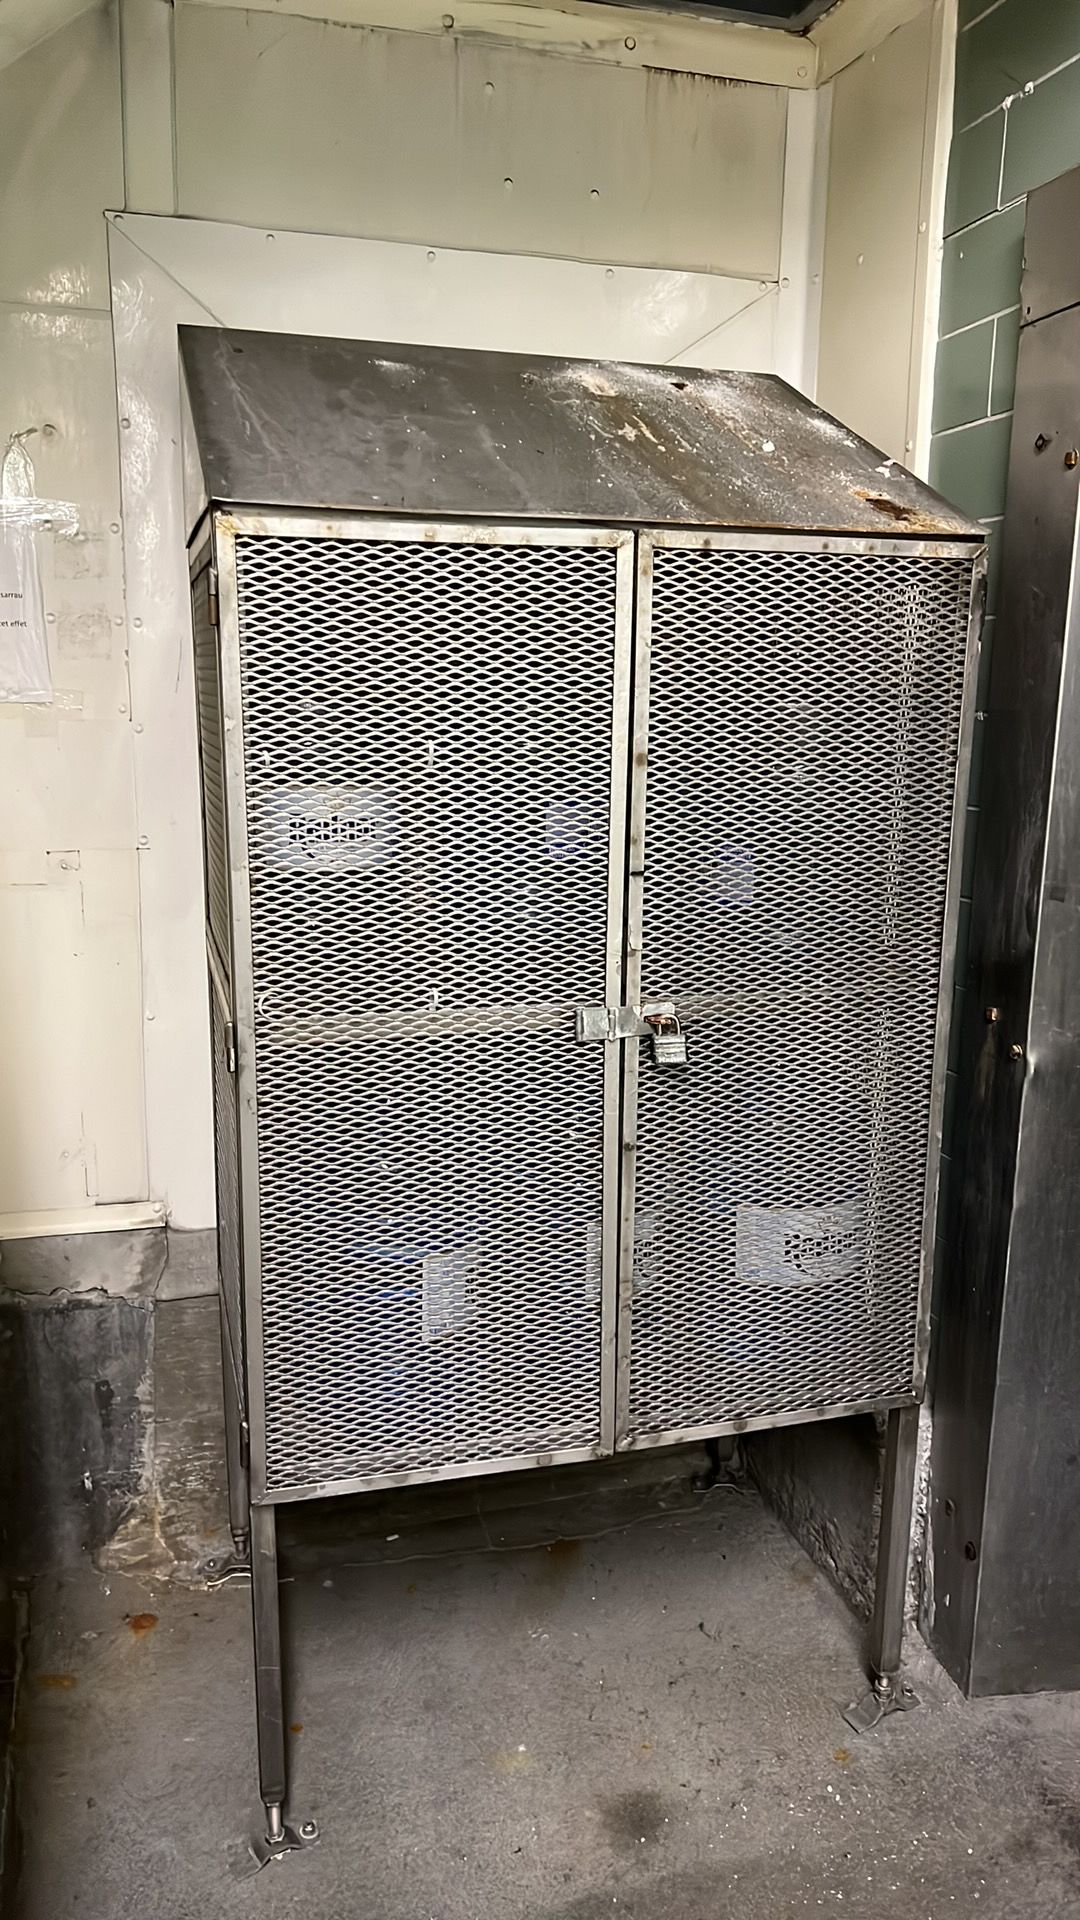 2-Door Steel Storage Cage w/ Grill Walls, 2-Levels, Angled top.